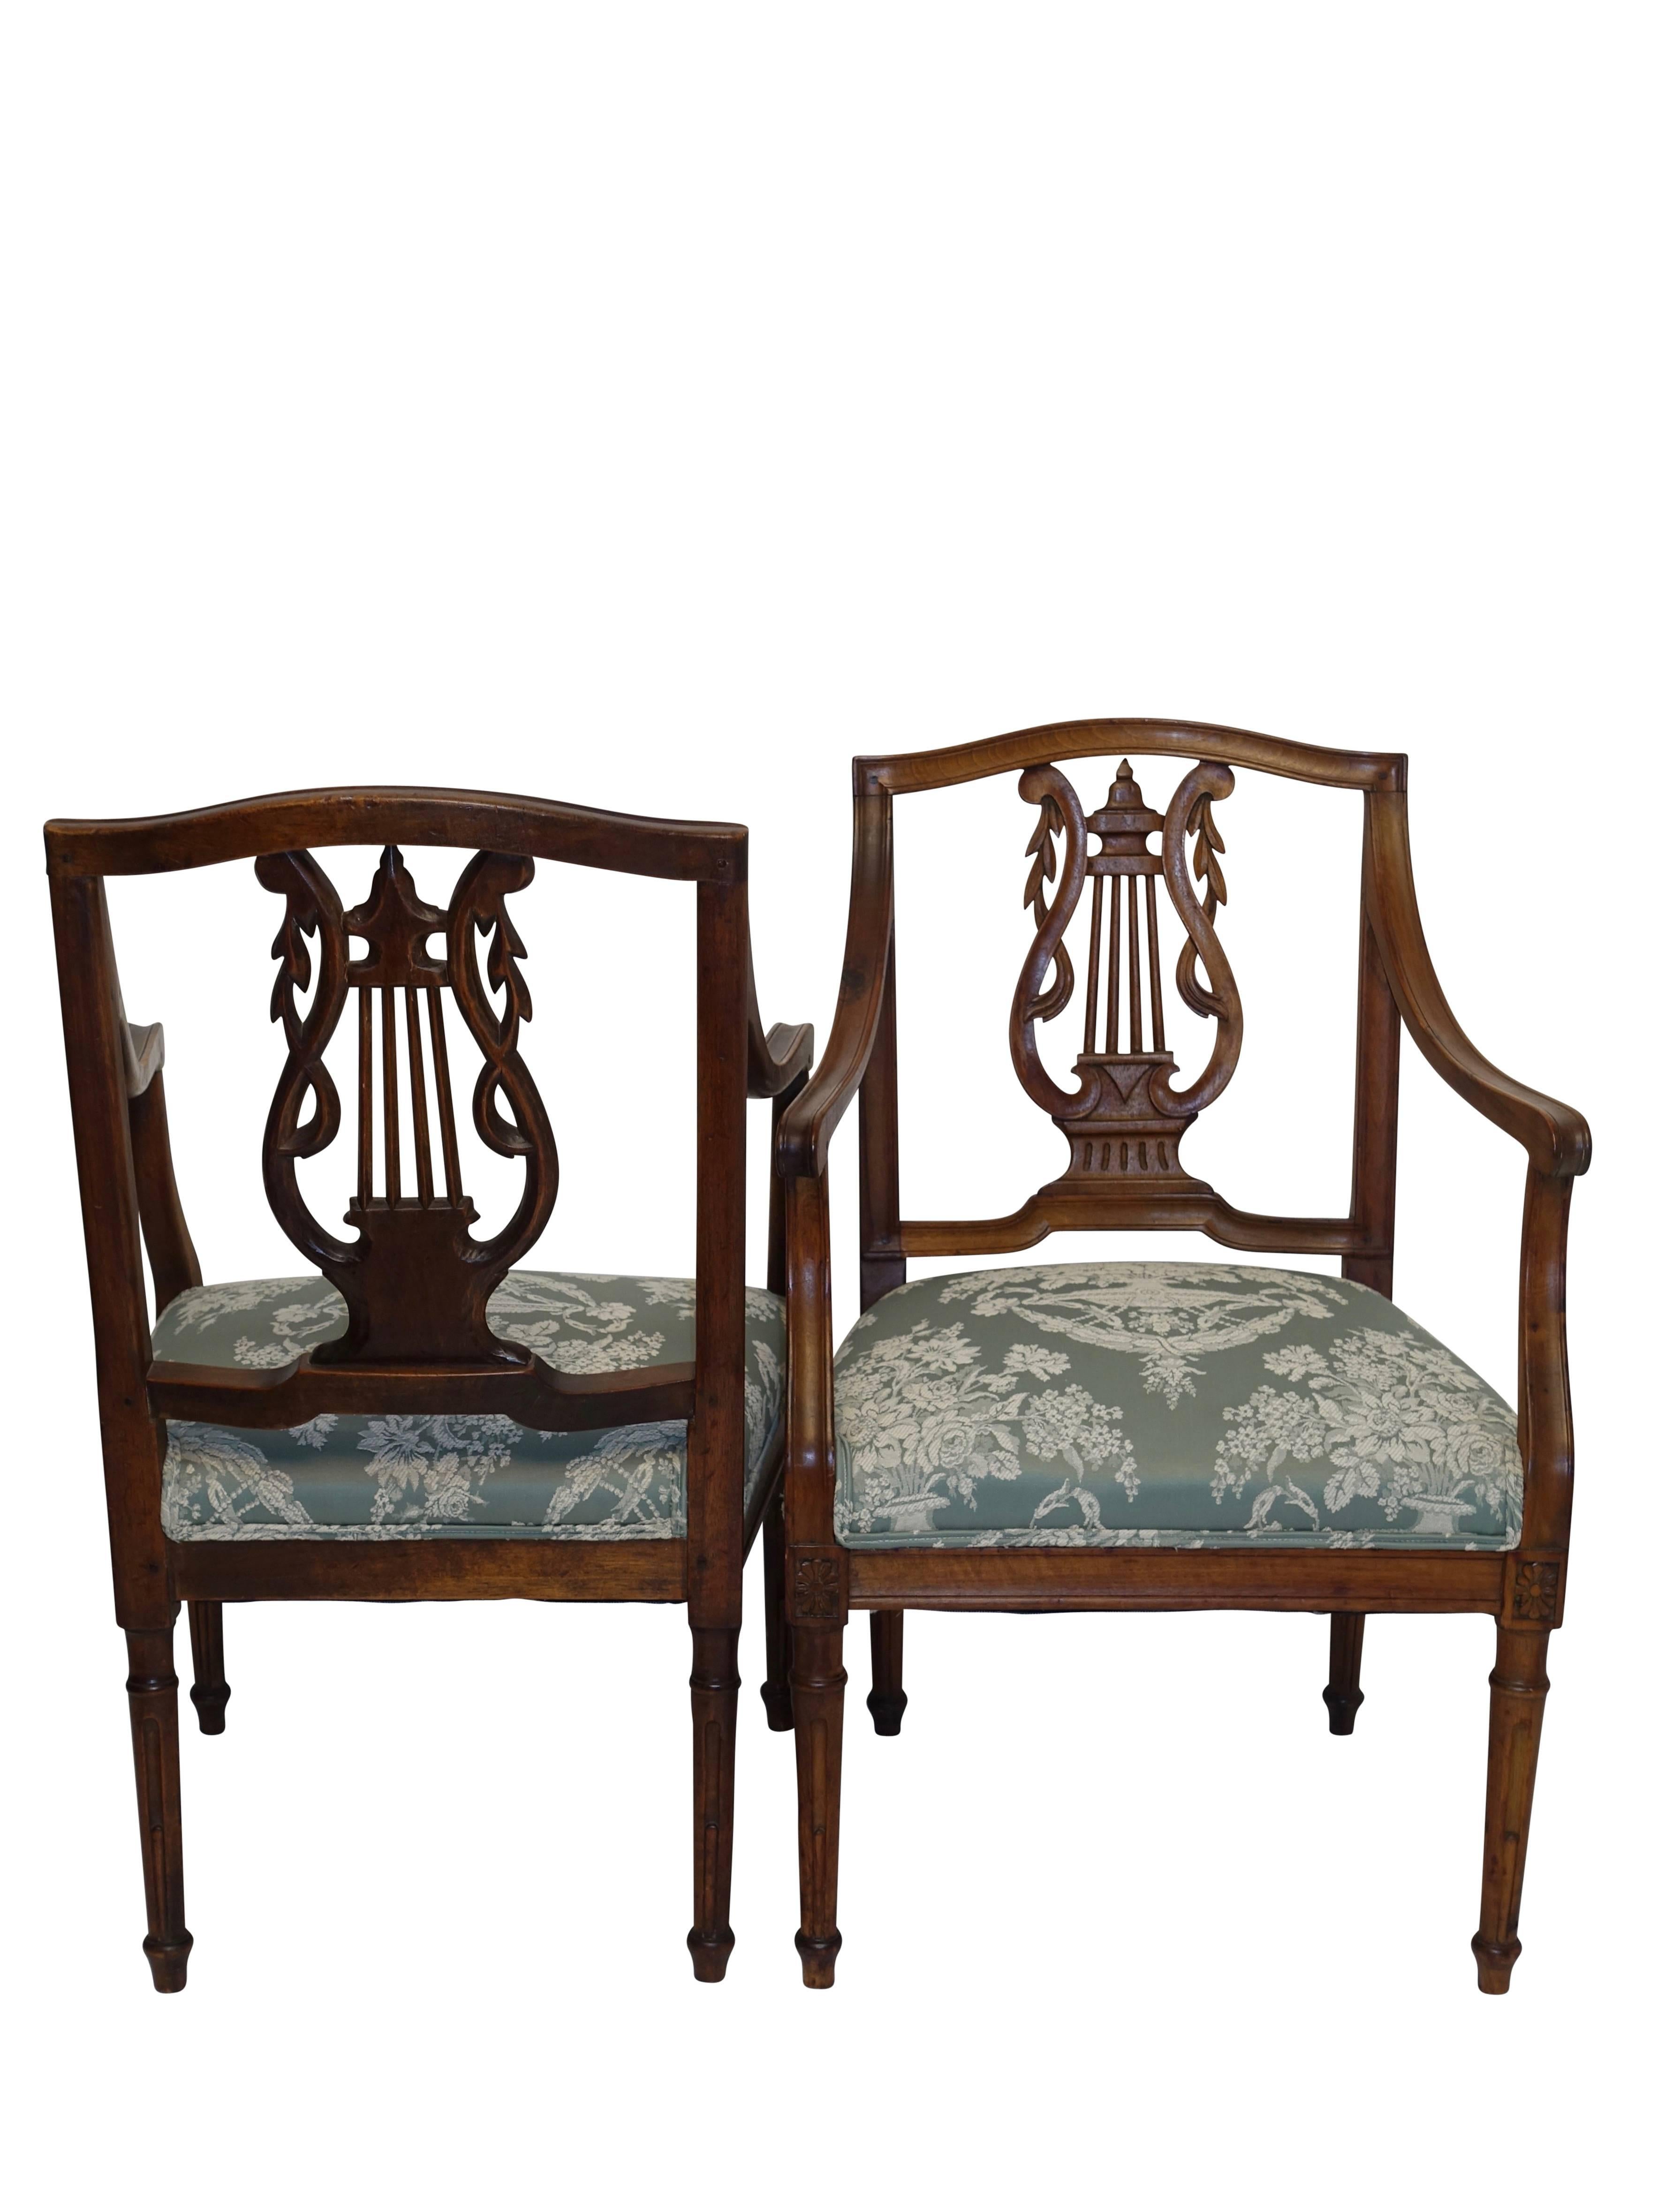 Pair of Neoclassical Walnut Armchairs, Italy, 18th Century For Sale 3